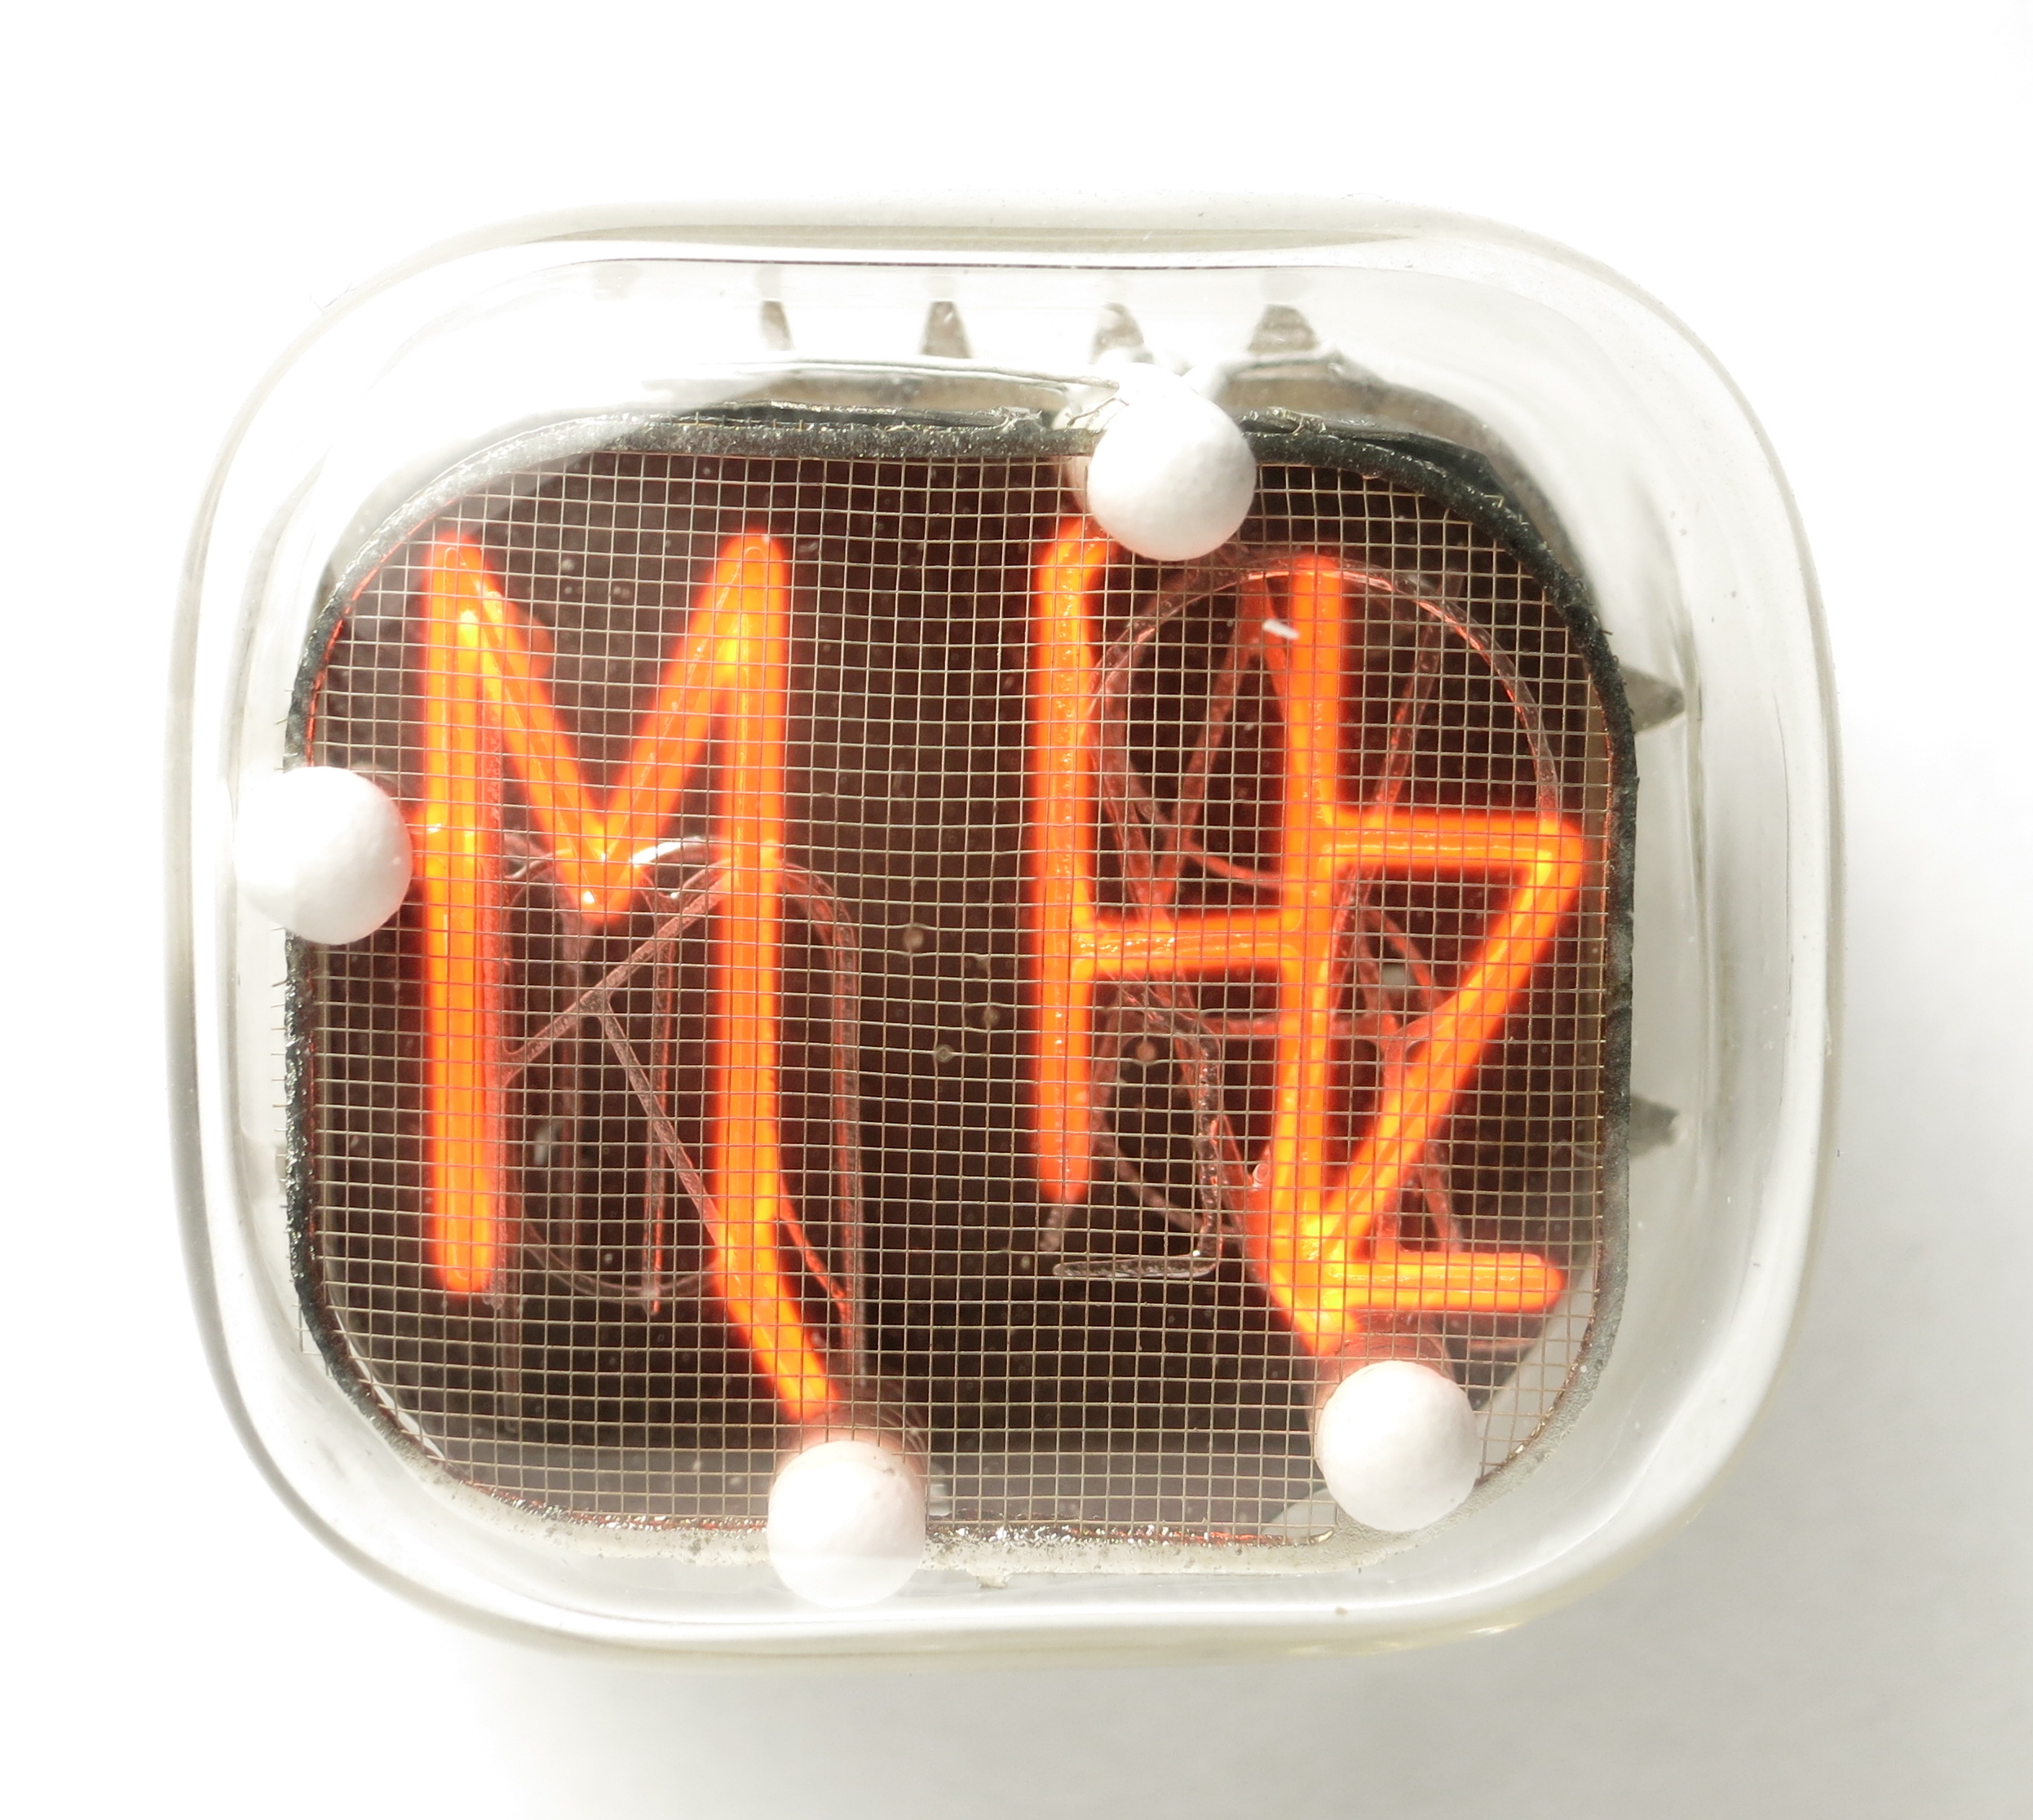 The combined symbol 'MHz' of the IN-XX